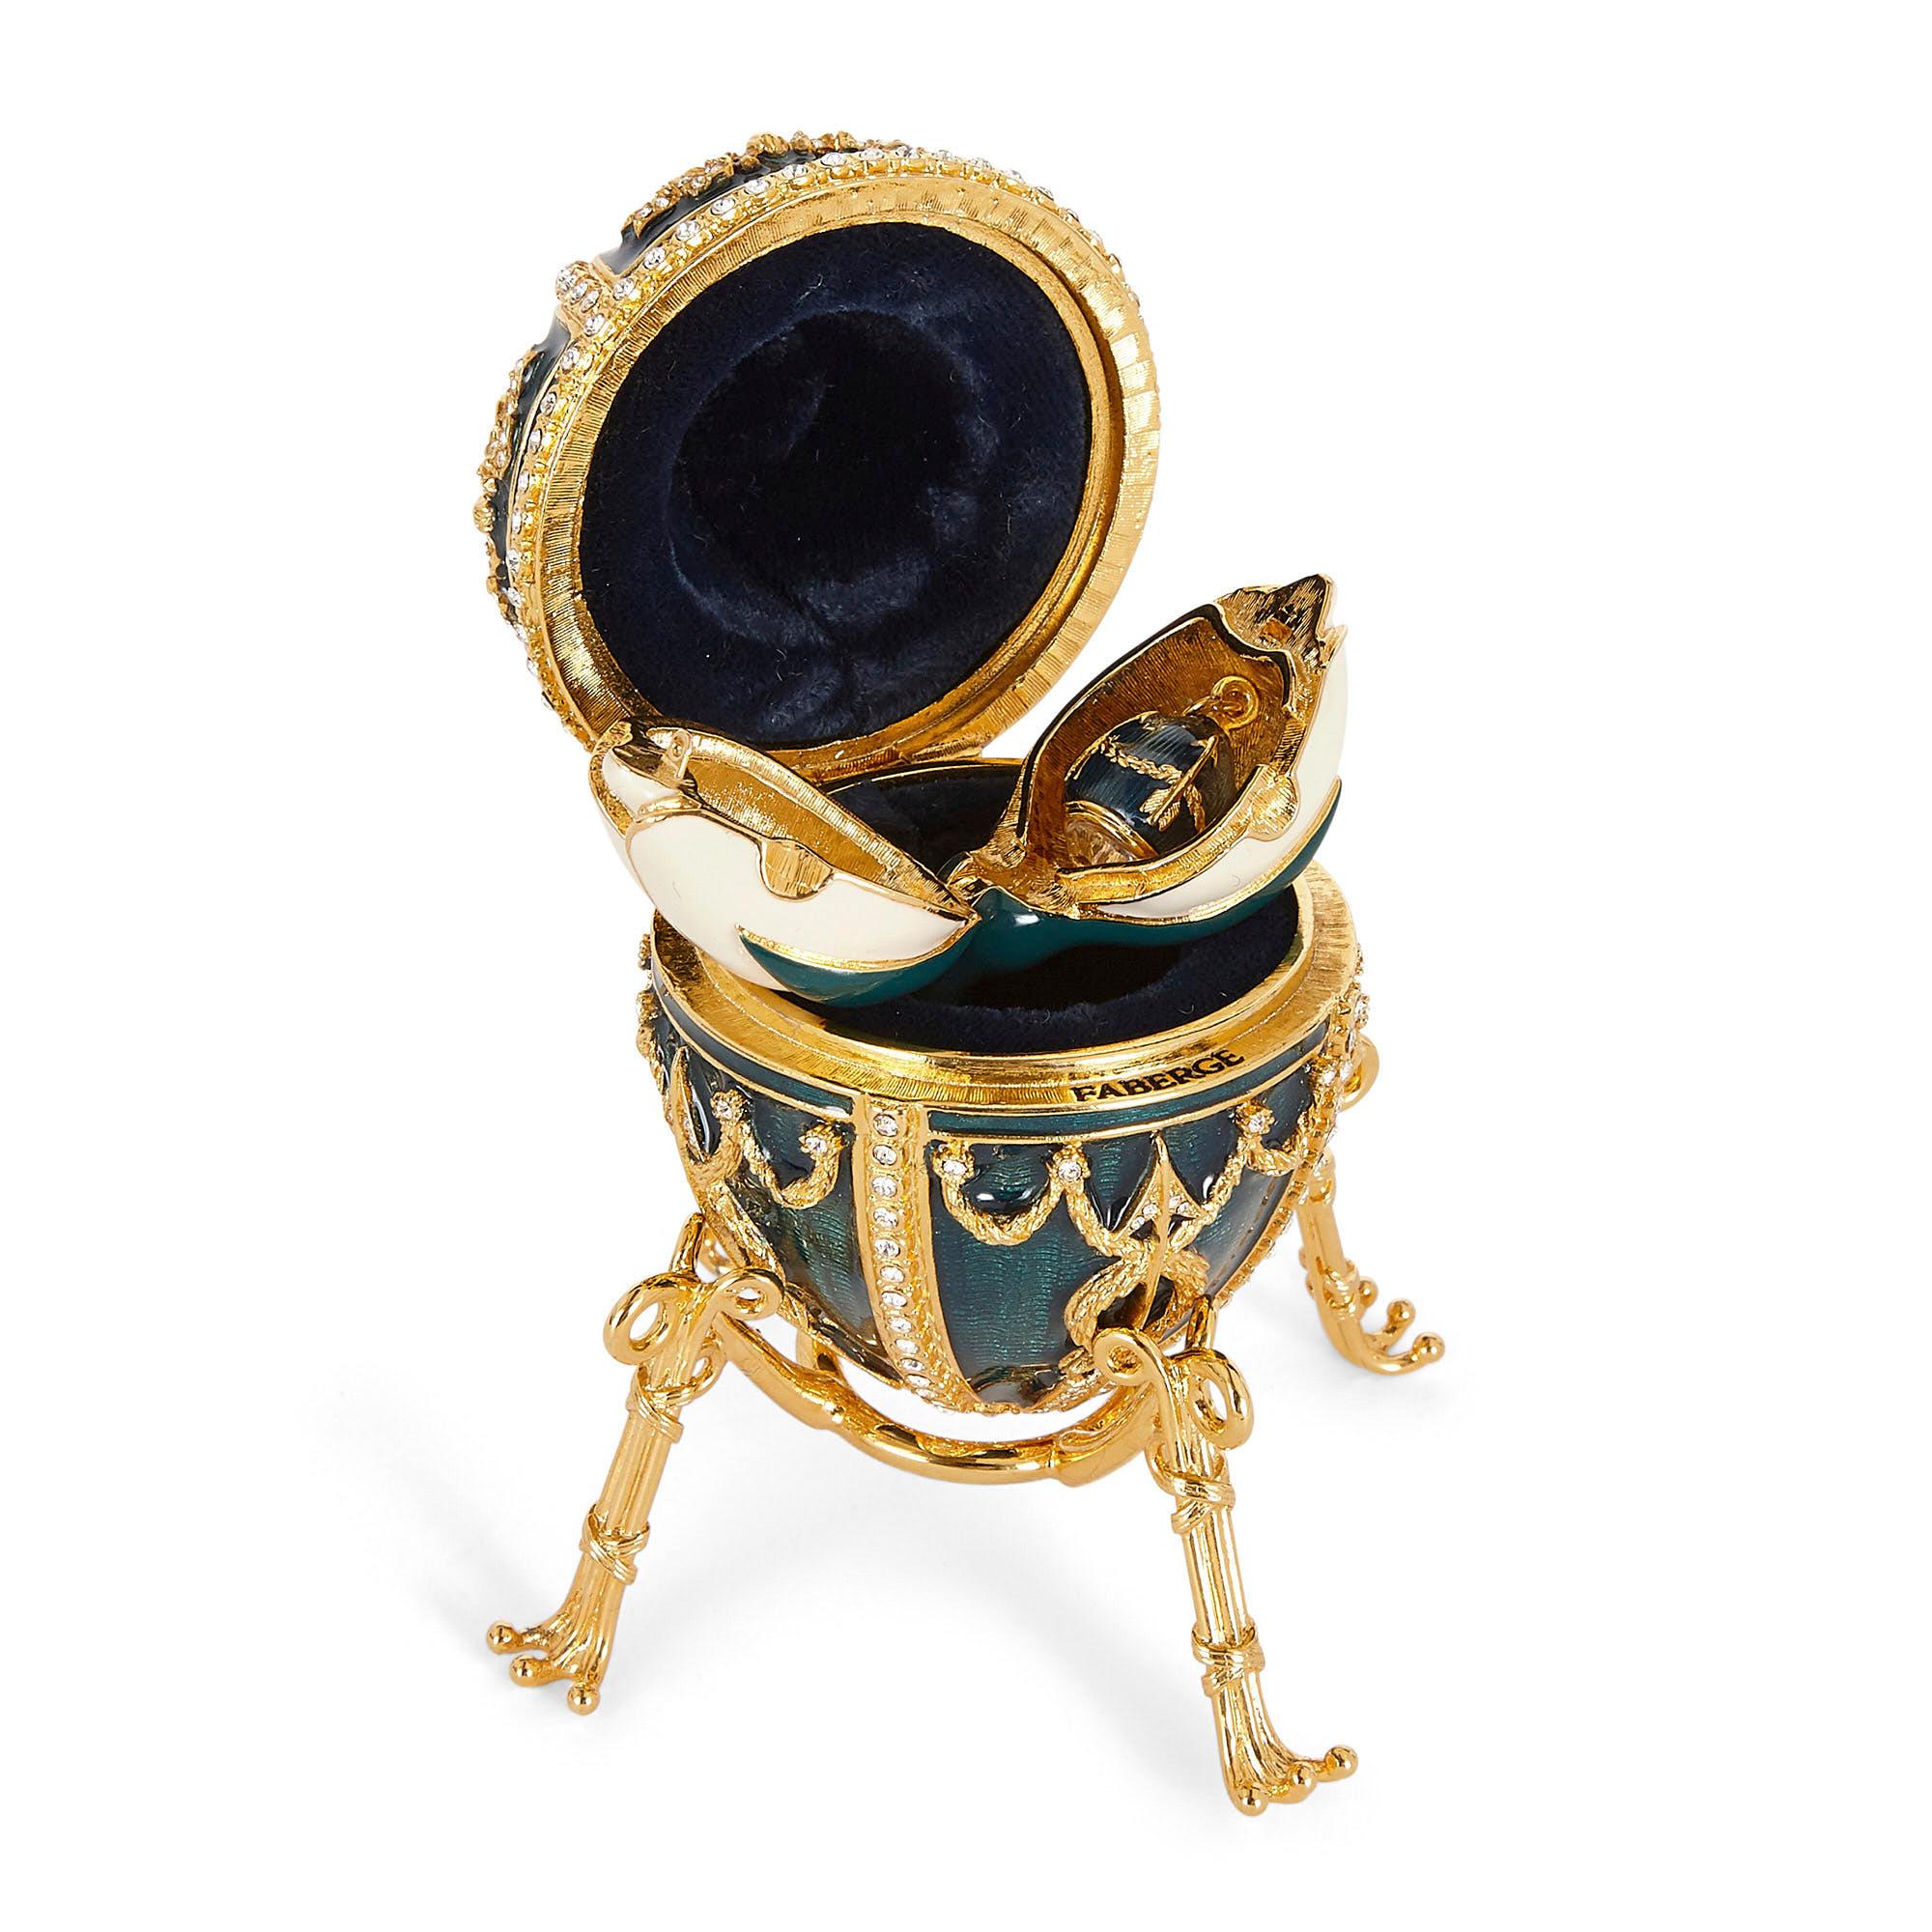 Gilt Contemporary Fabergé Easter Egg with Green Guilloché Enamel and Gemstones